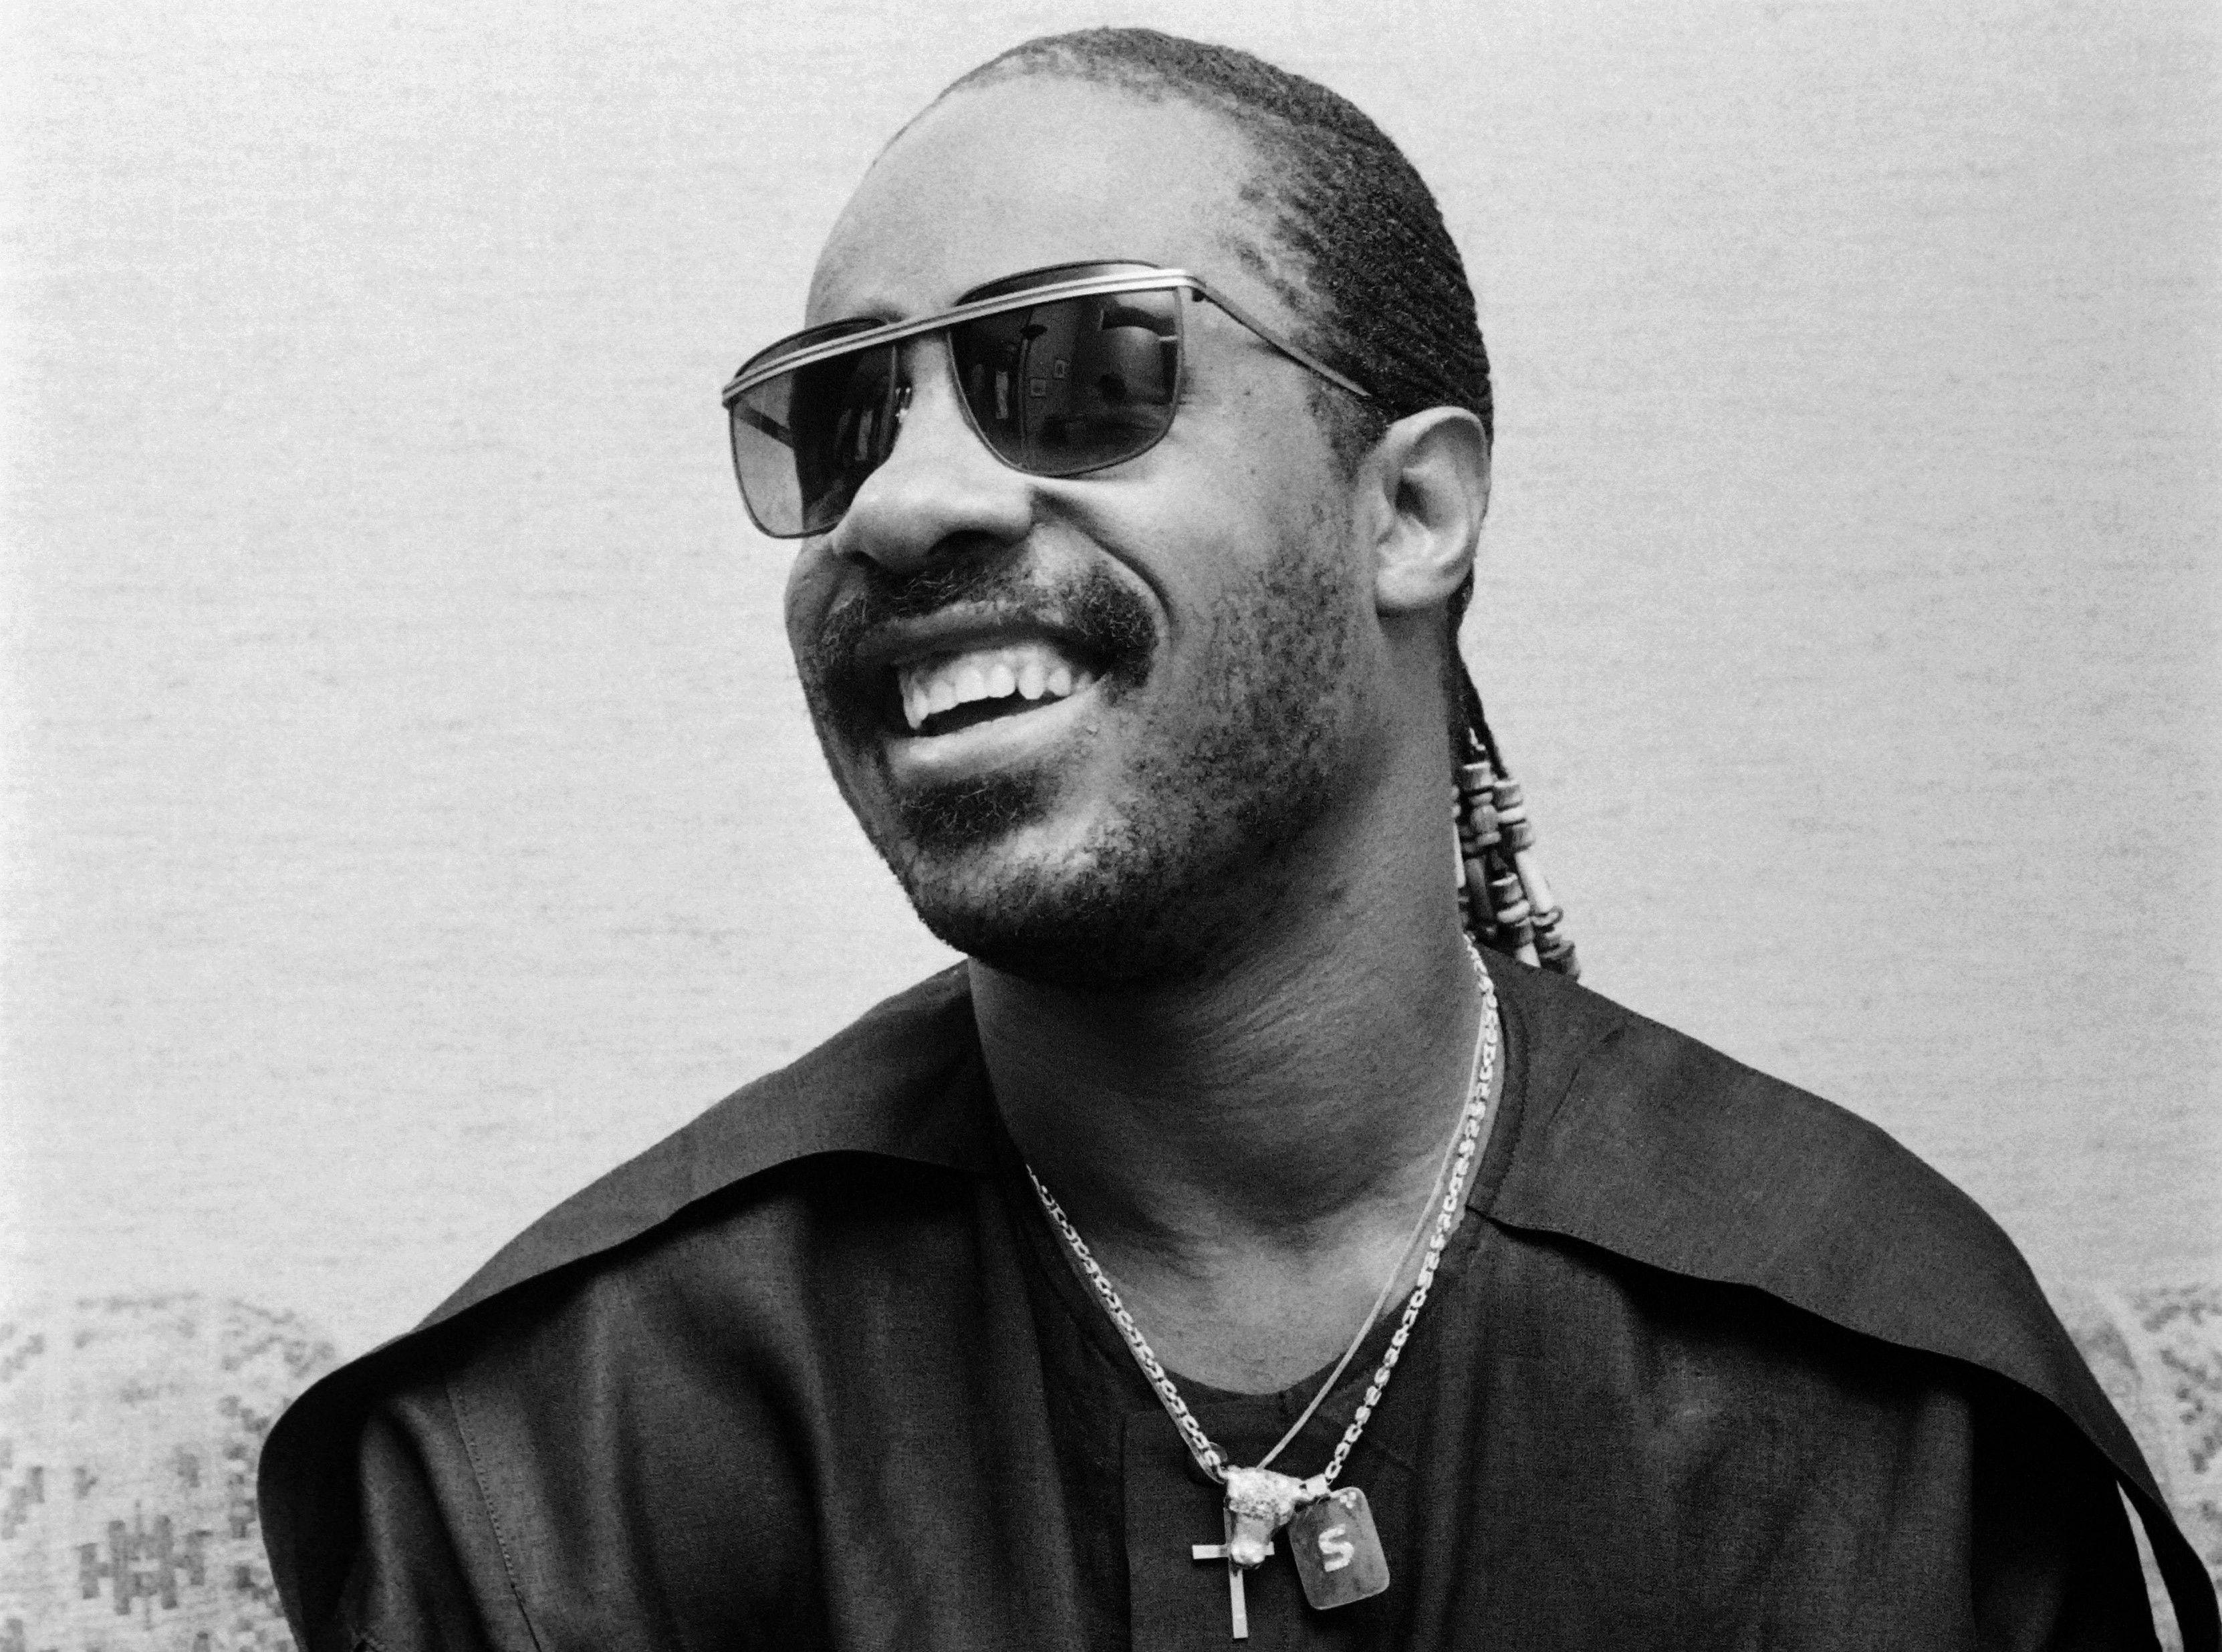 High Quality Stevie Wonder Wallpaper. Full HD Picture